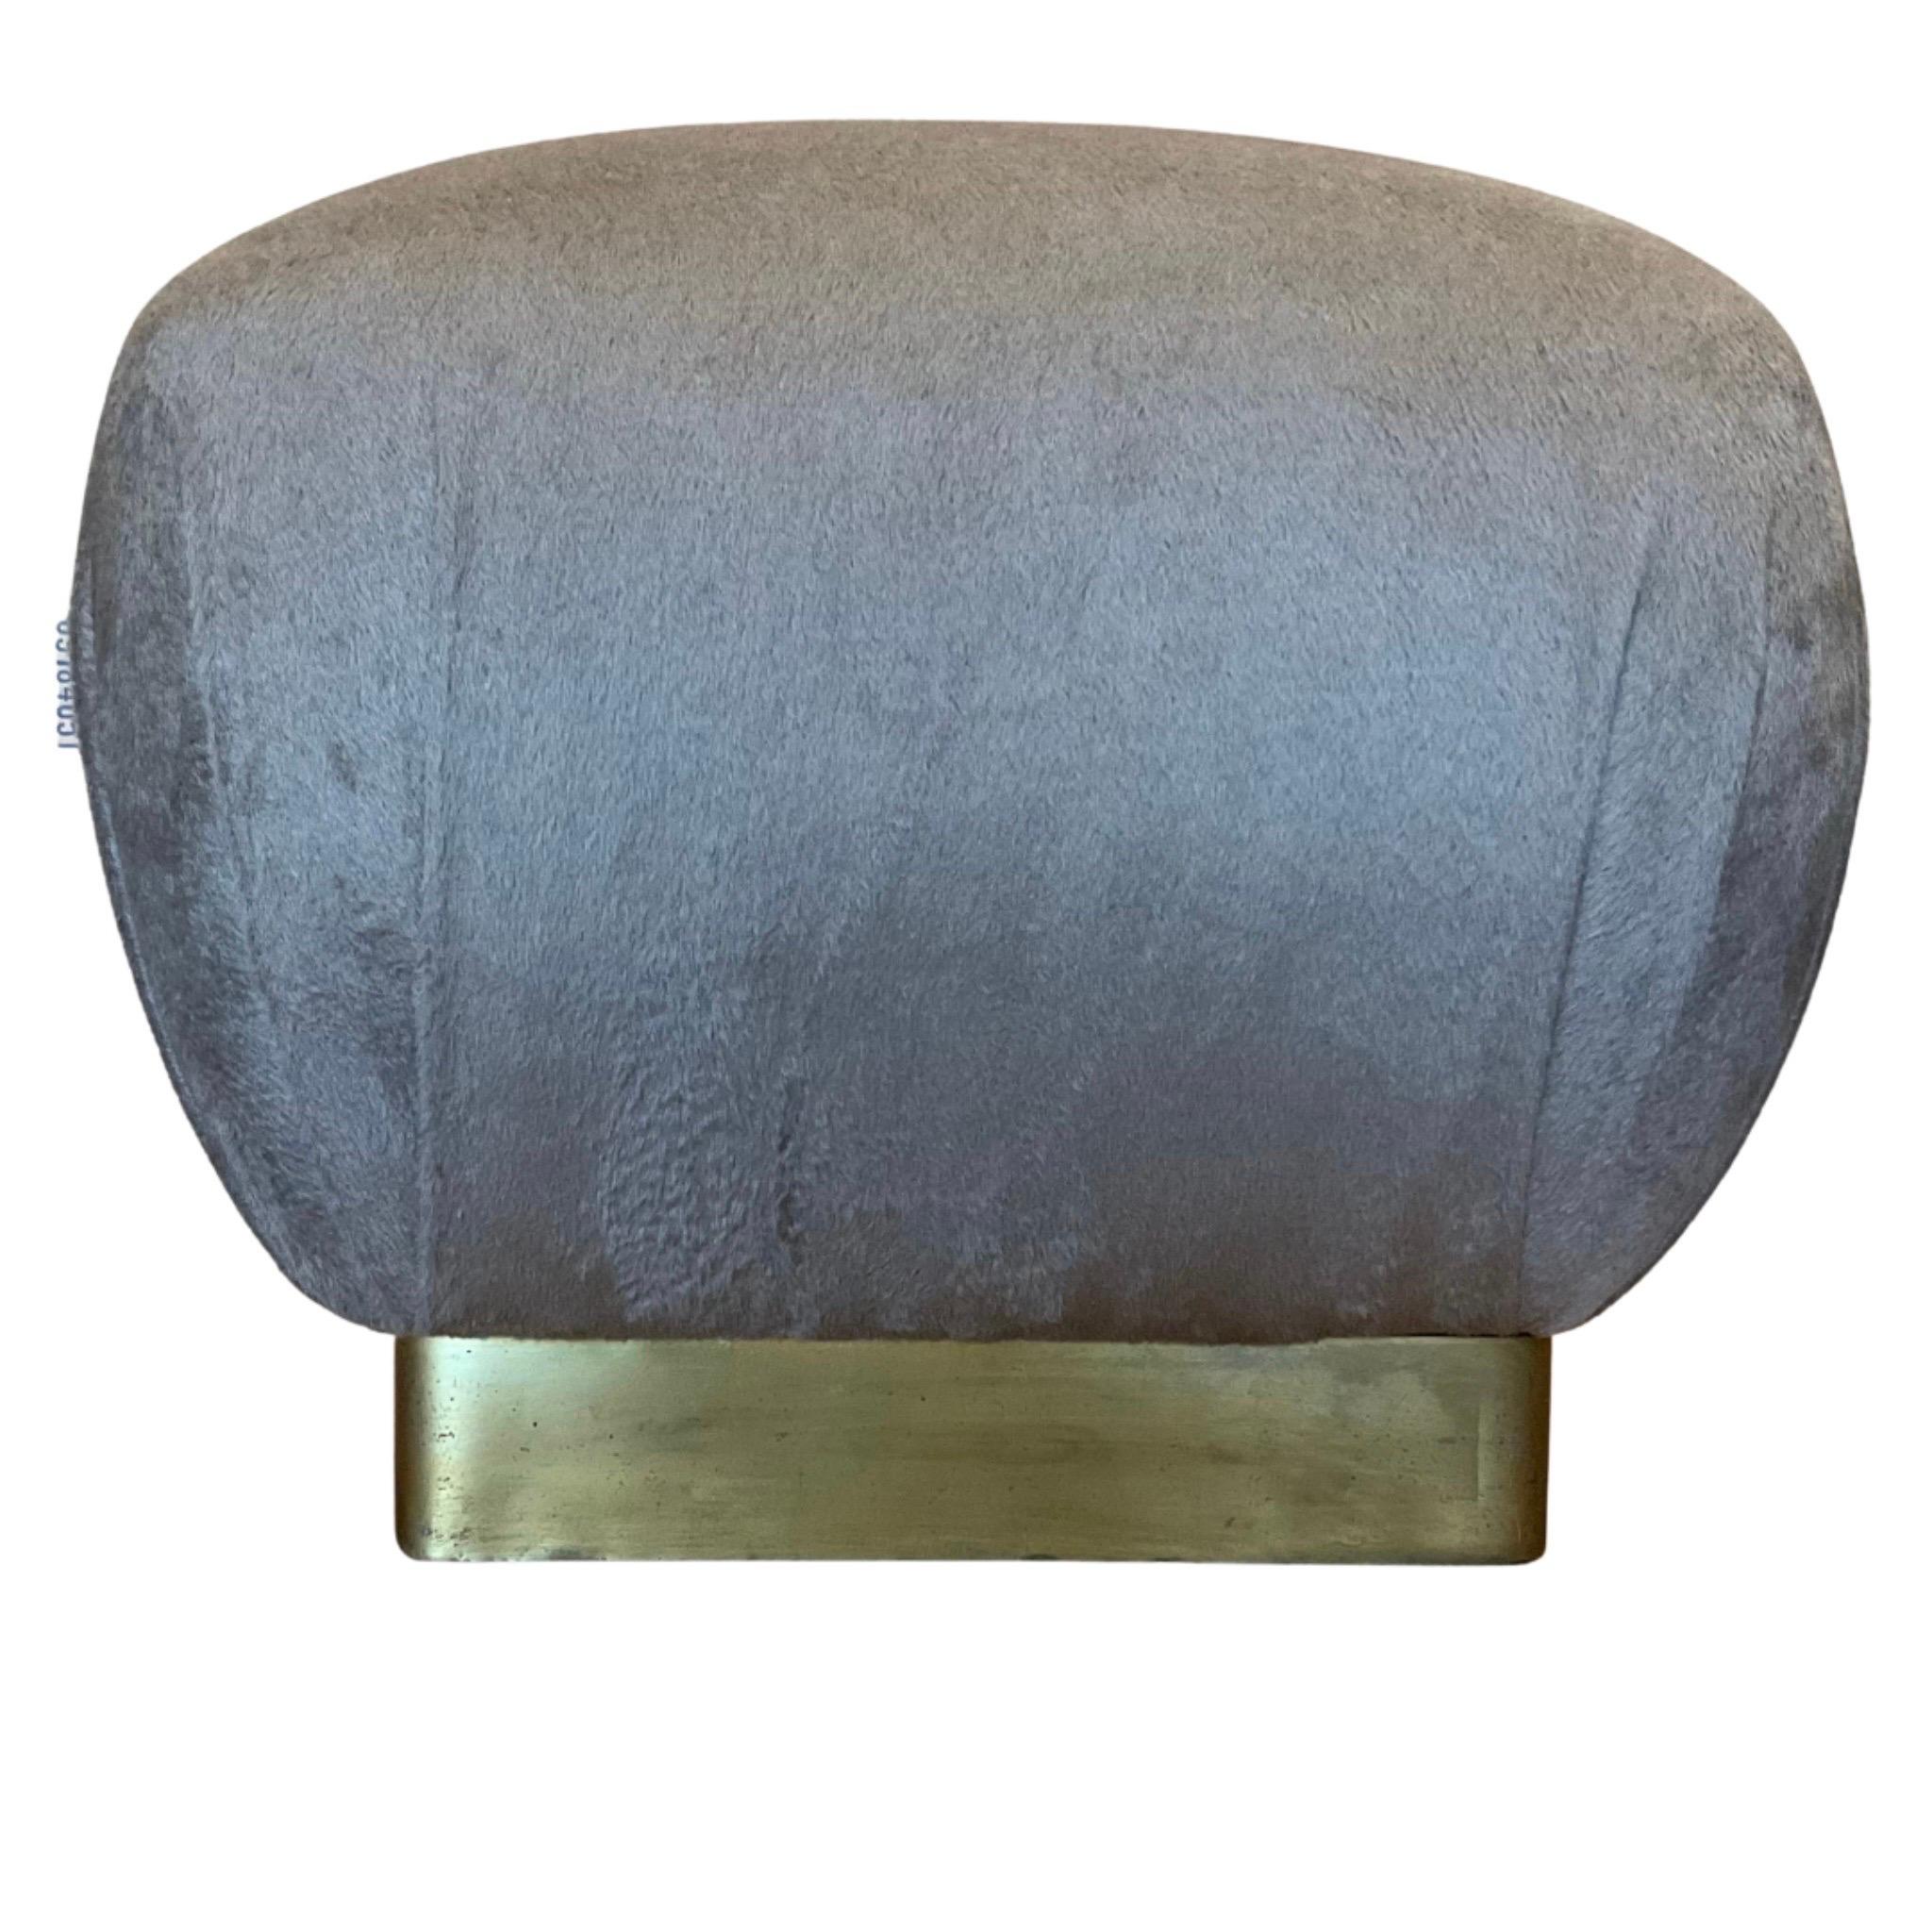 Beautiful Vintage Marge Carson Pair of Poufs
These Ottomans feature a Brass Base
With Beautiful Brand New Angora Wool Upholstery
The Fabric is a very Neutral Taupe Tone
A great accent to any Room
Works well with a Sofa, Lounge Chair, Loveseat, etc.